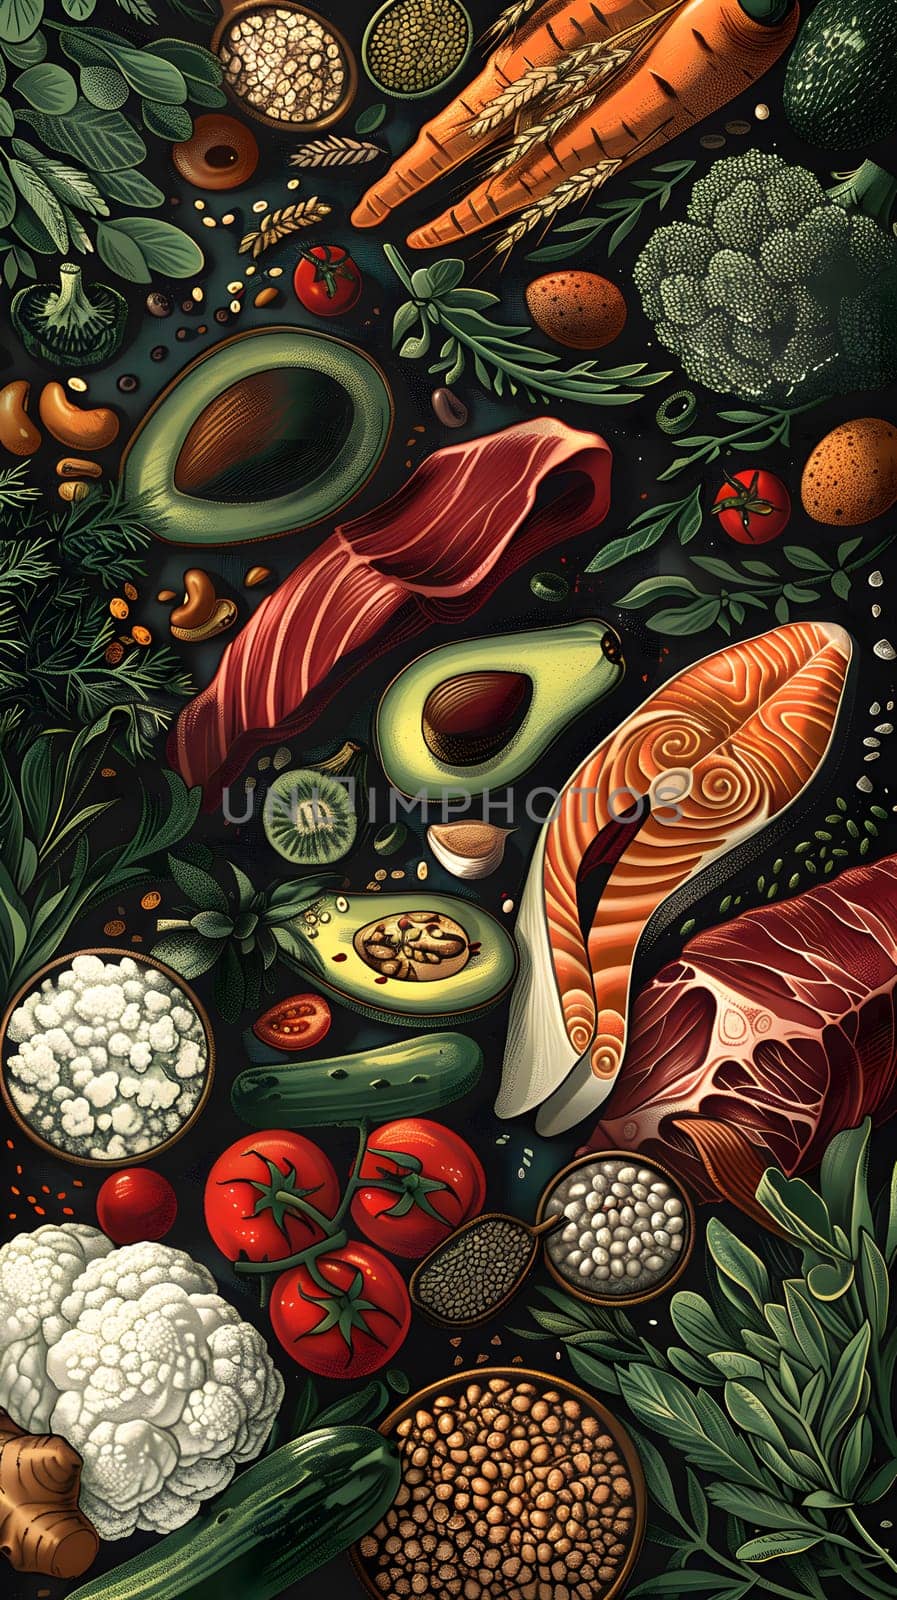 An illustration of a diverse array of fruits and vegetables in a vibrant painting, showcasing the beauty of natural foods through intricate patterns and artistic detail